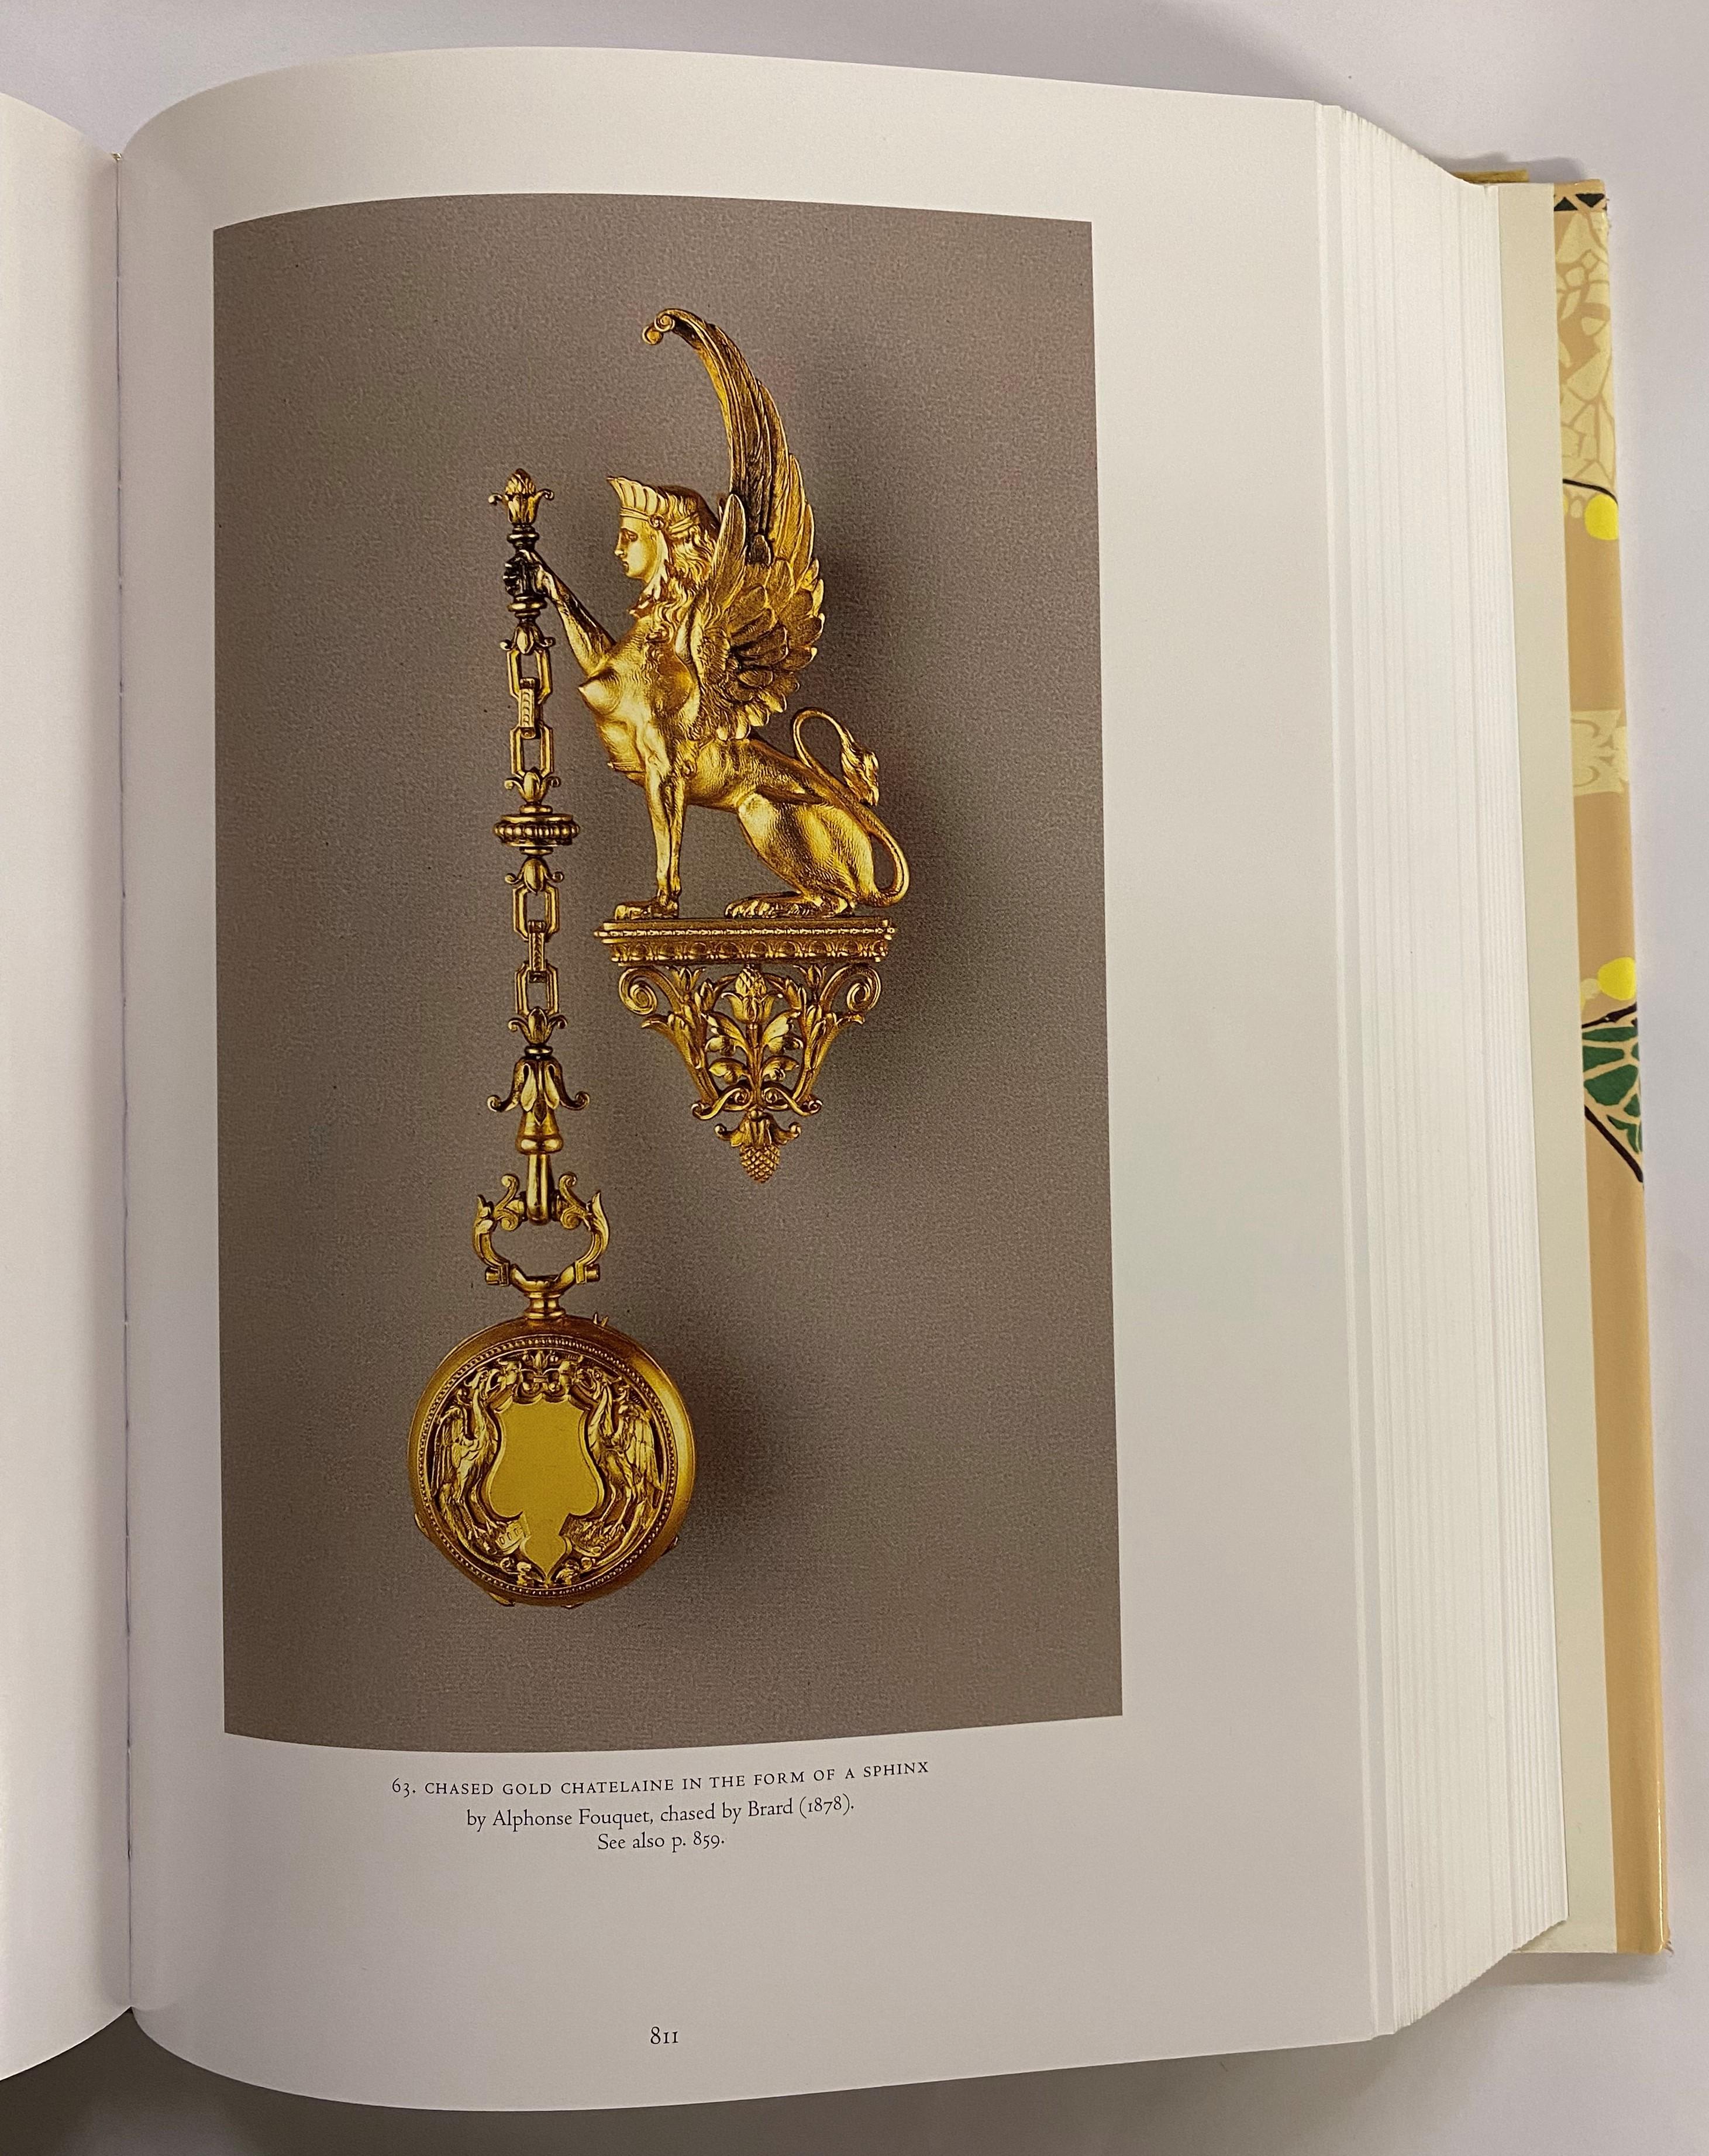 Henri Vever: French Jewelry of the Nineteenth Century by Henri Vever 'Book' 1